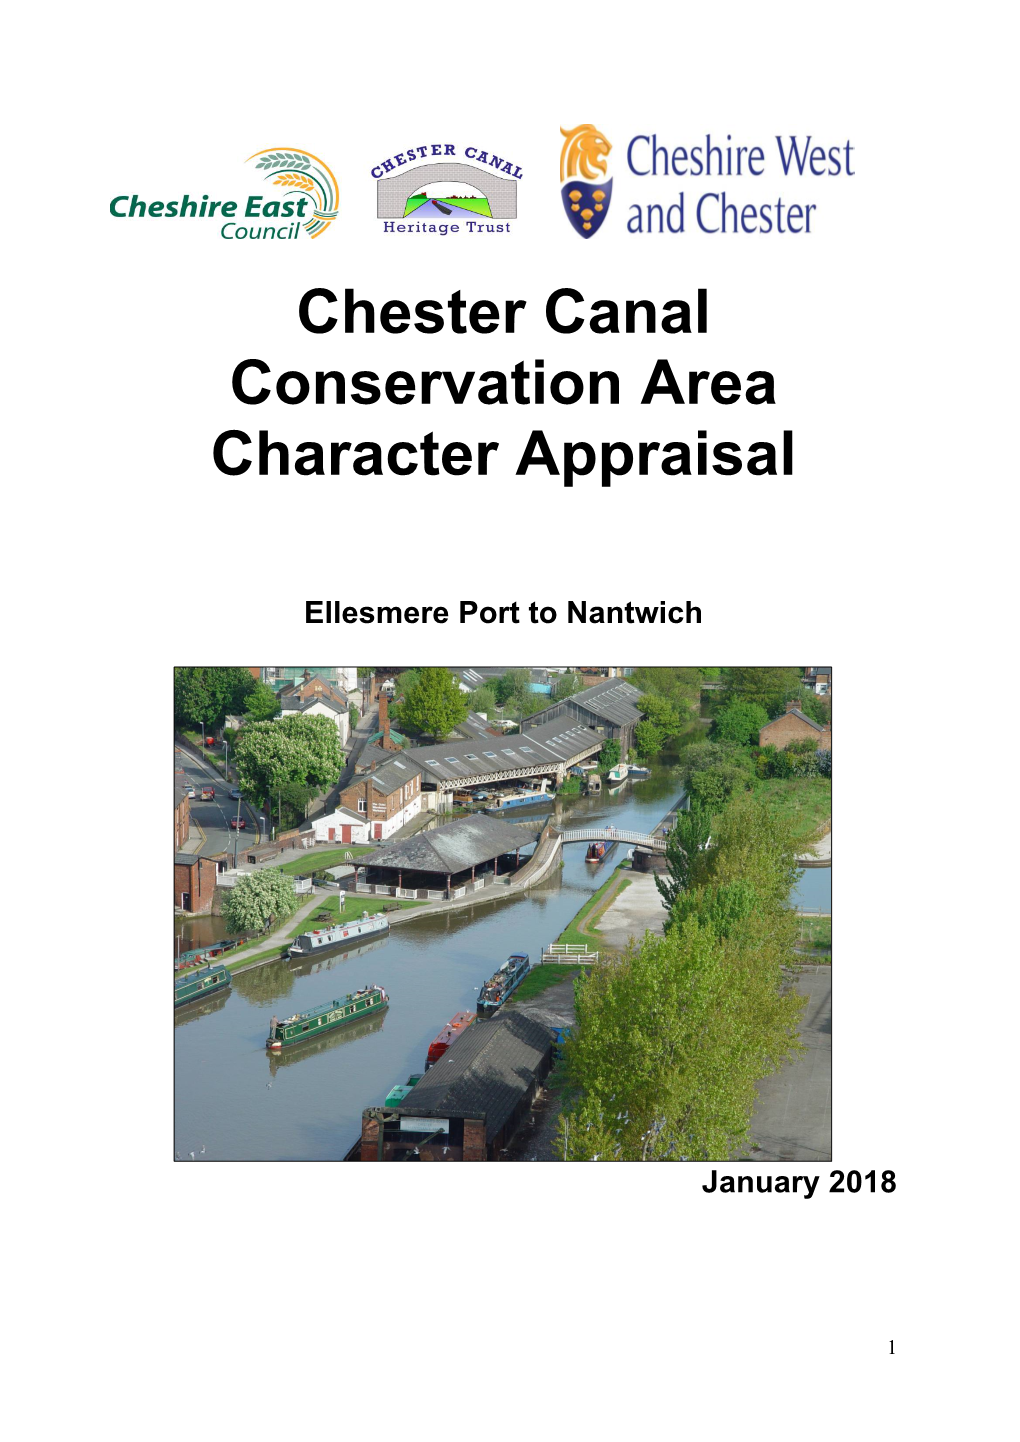 Chester Canal Conservation Area Character Appraisal